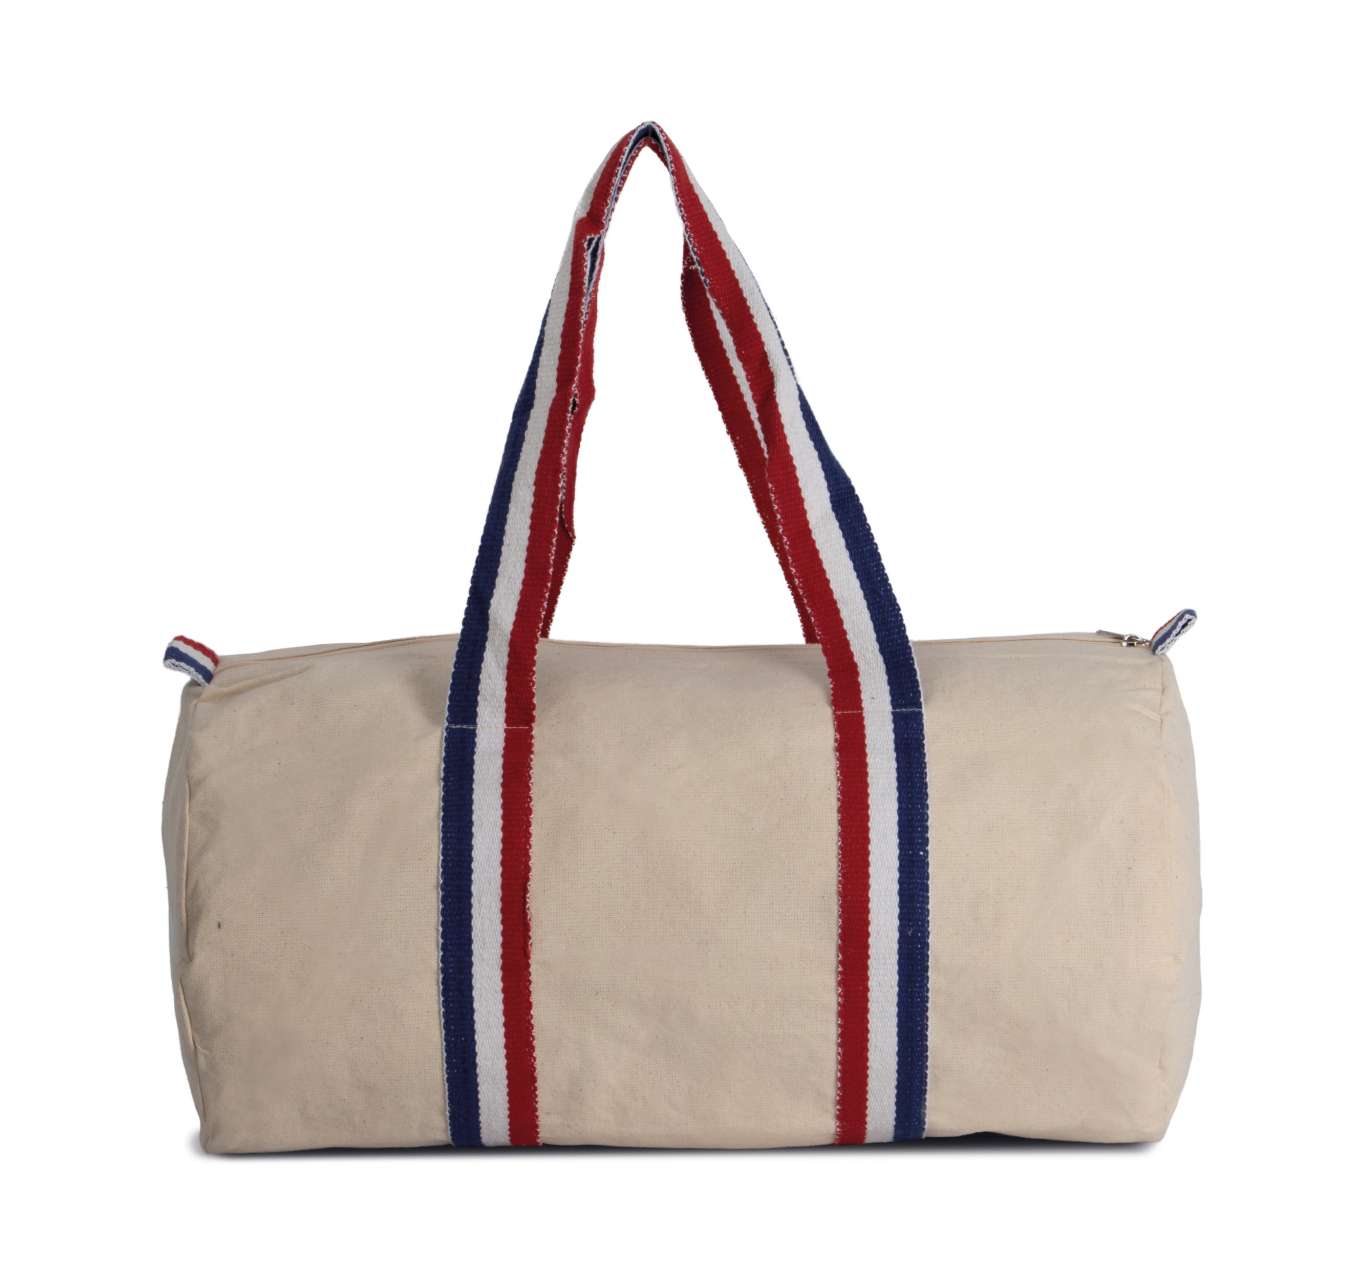 Promo  COTTON CANVAS HOLD-ALL BAG